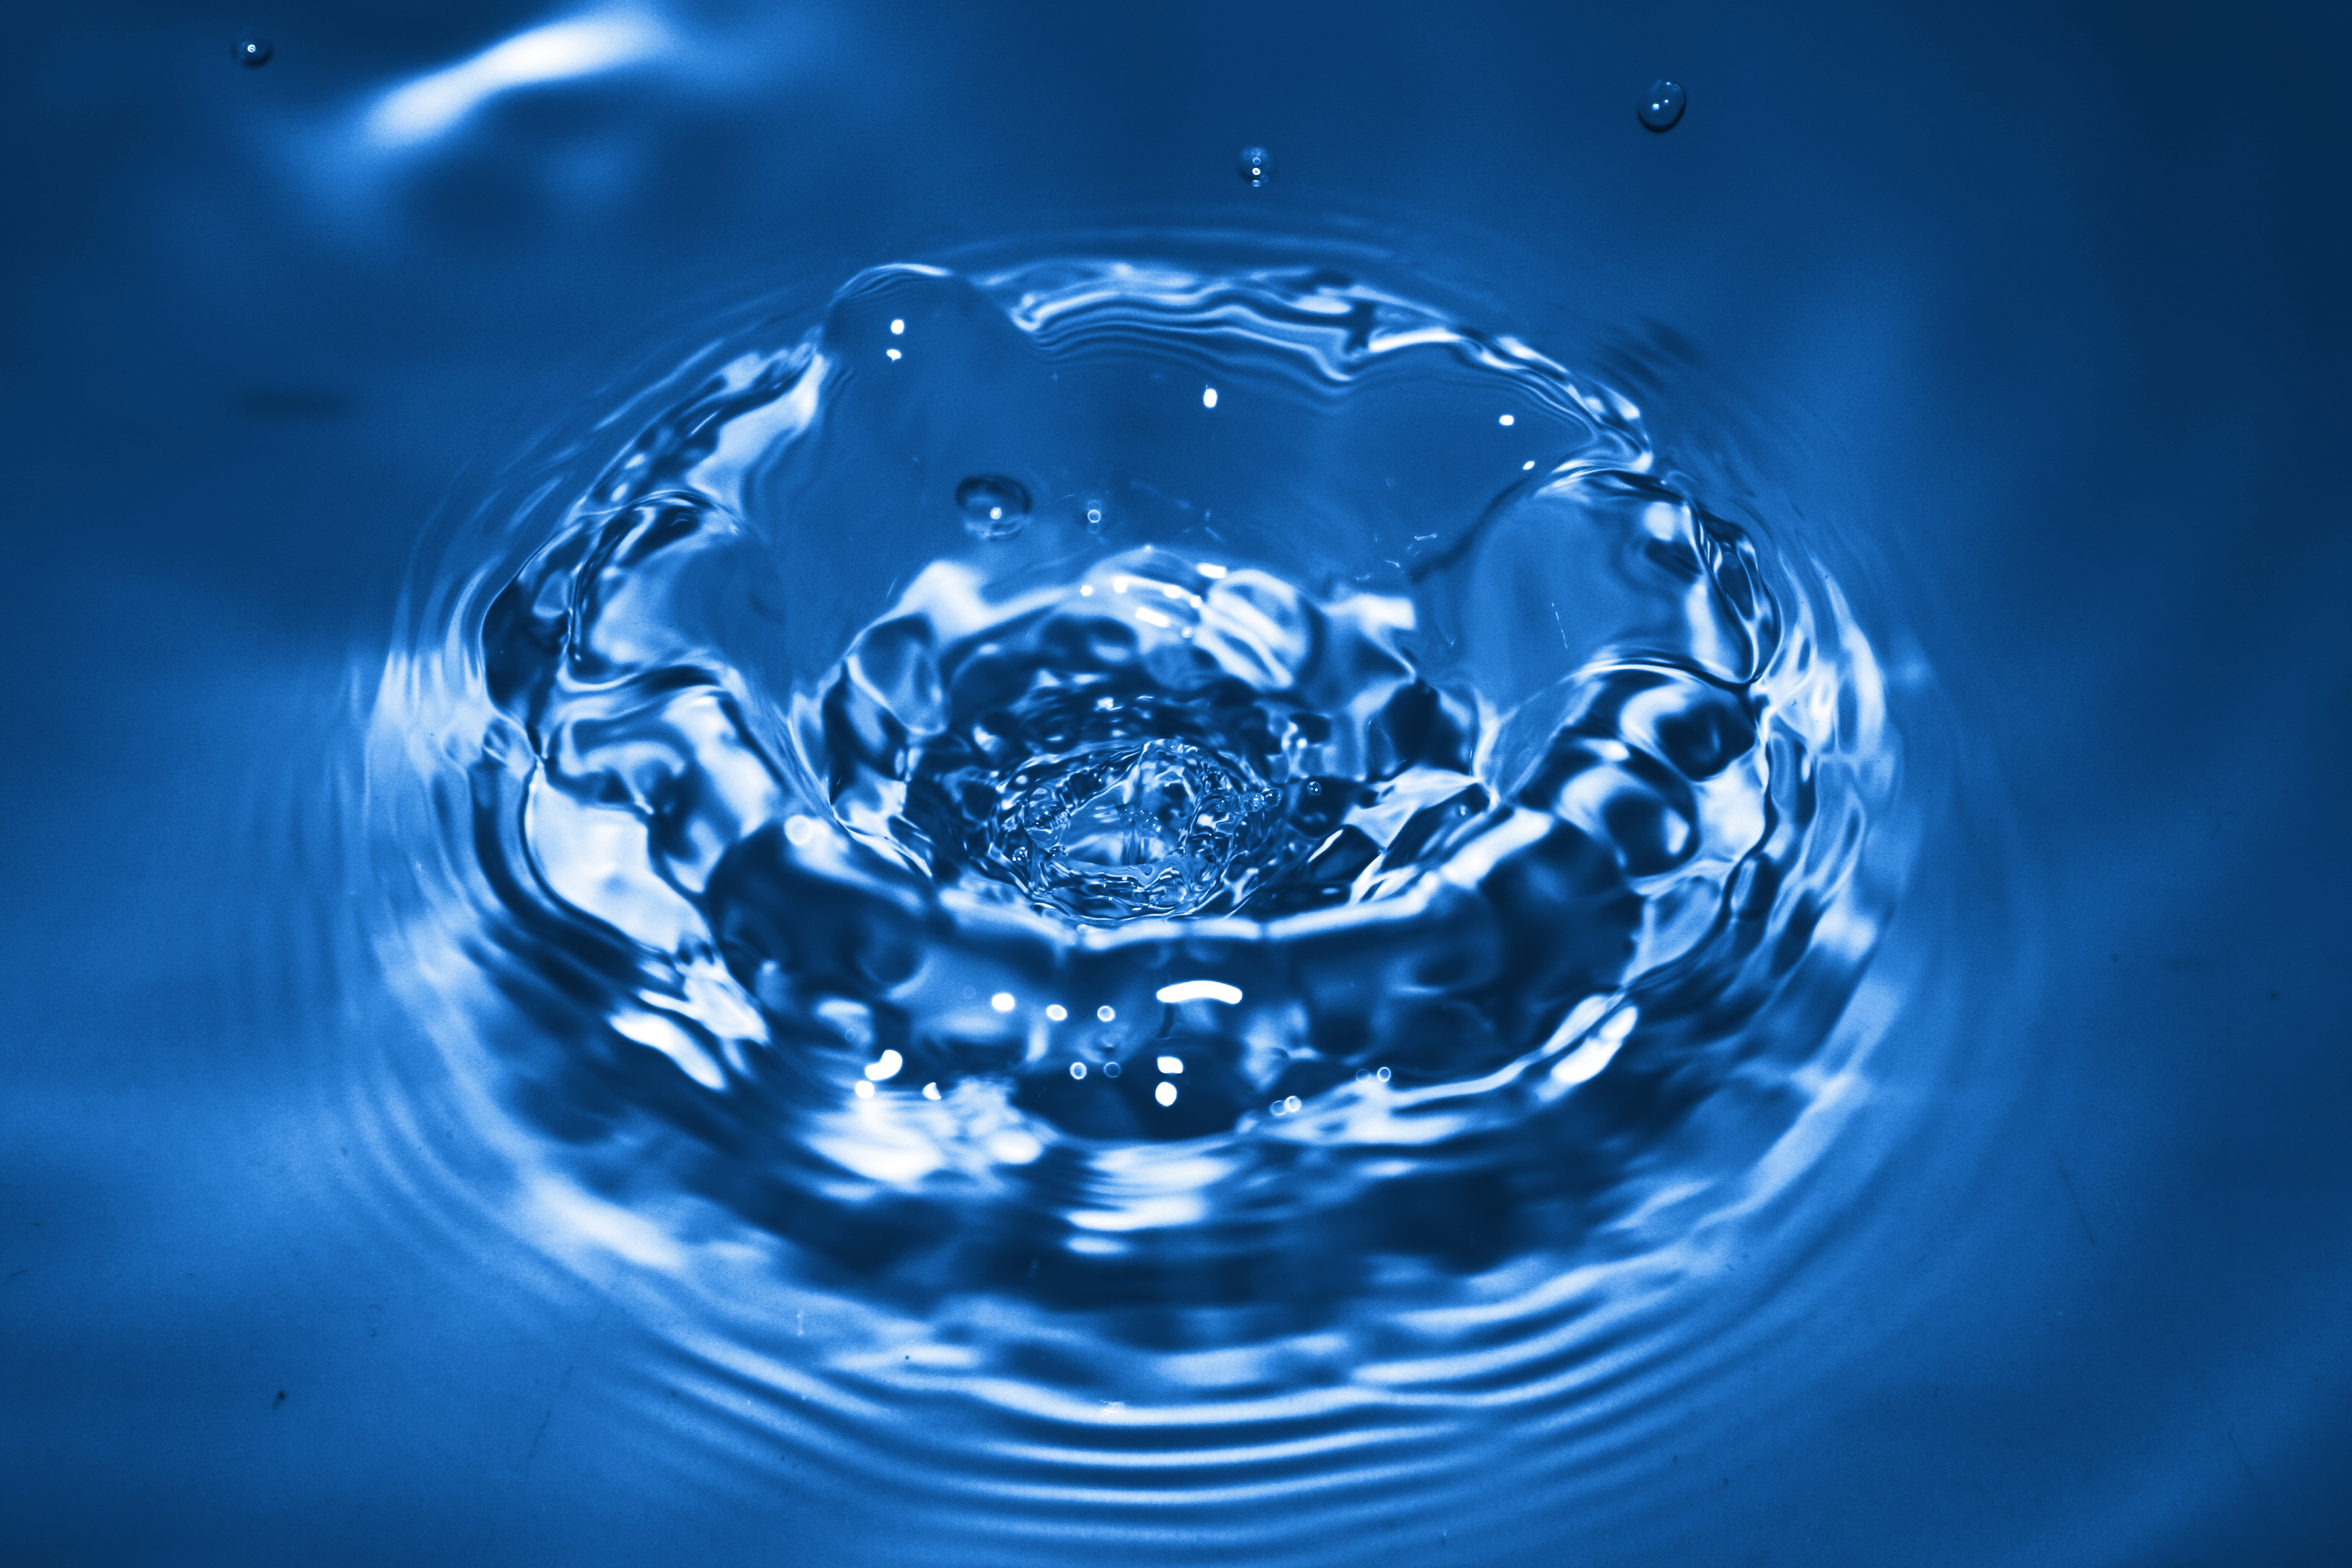 File:Water surface hit by water drop.jpg - Wikimedia Commons